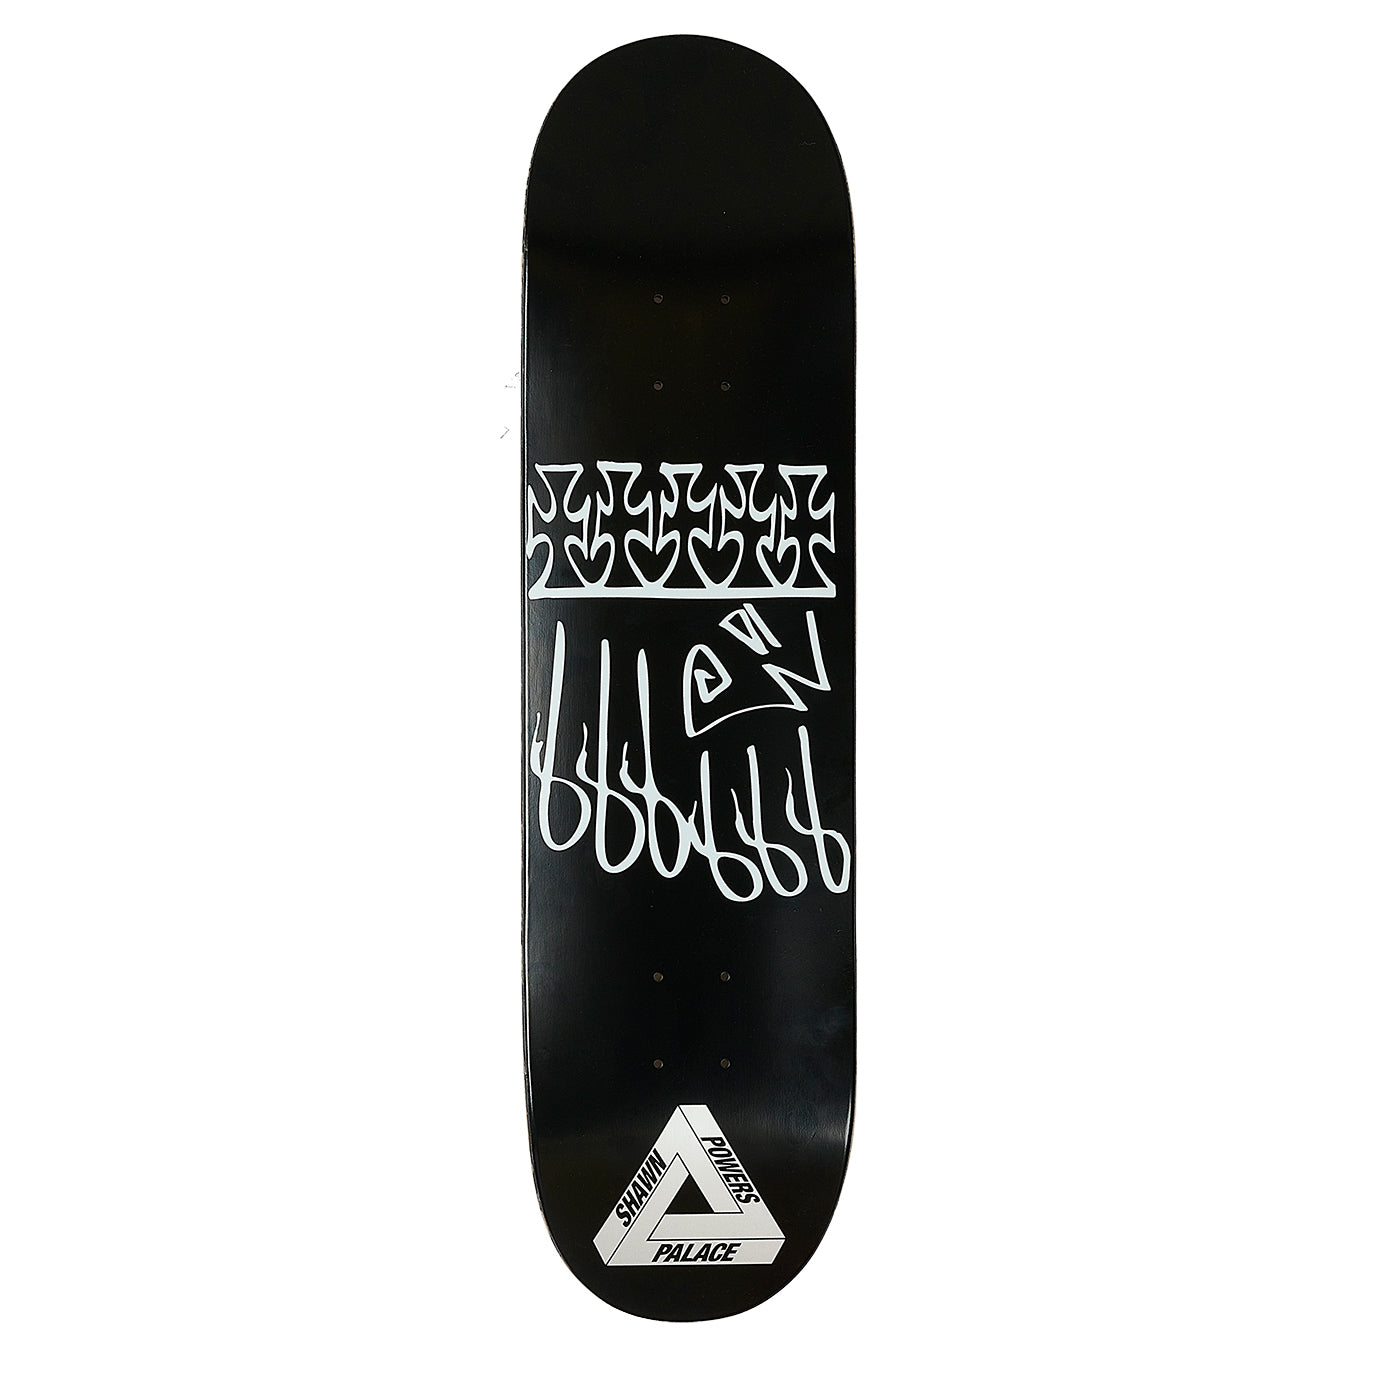 Palace Shawn Powers King S34 Deck - 8.2"